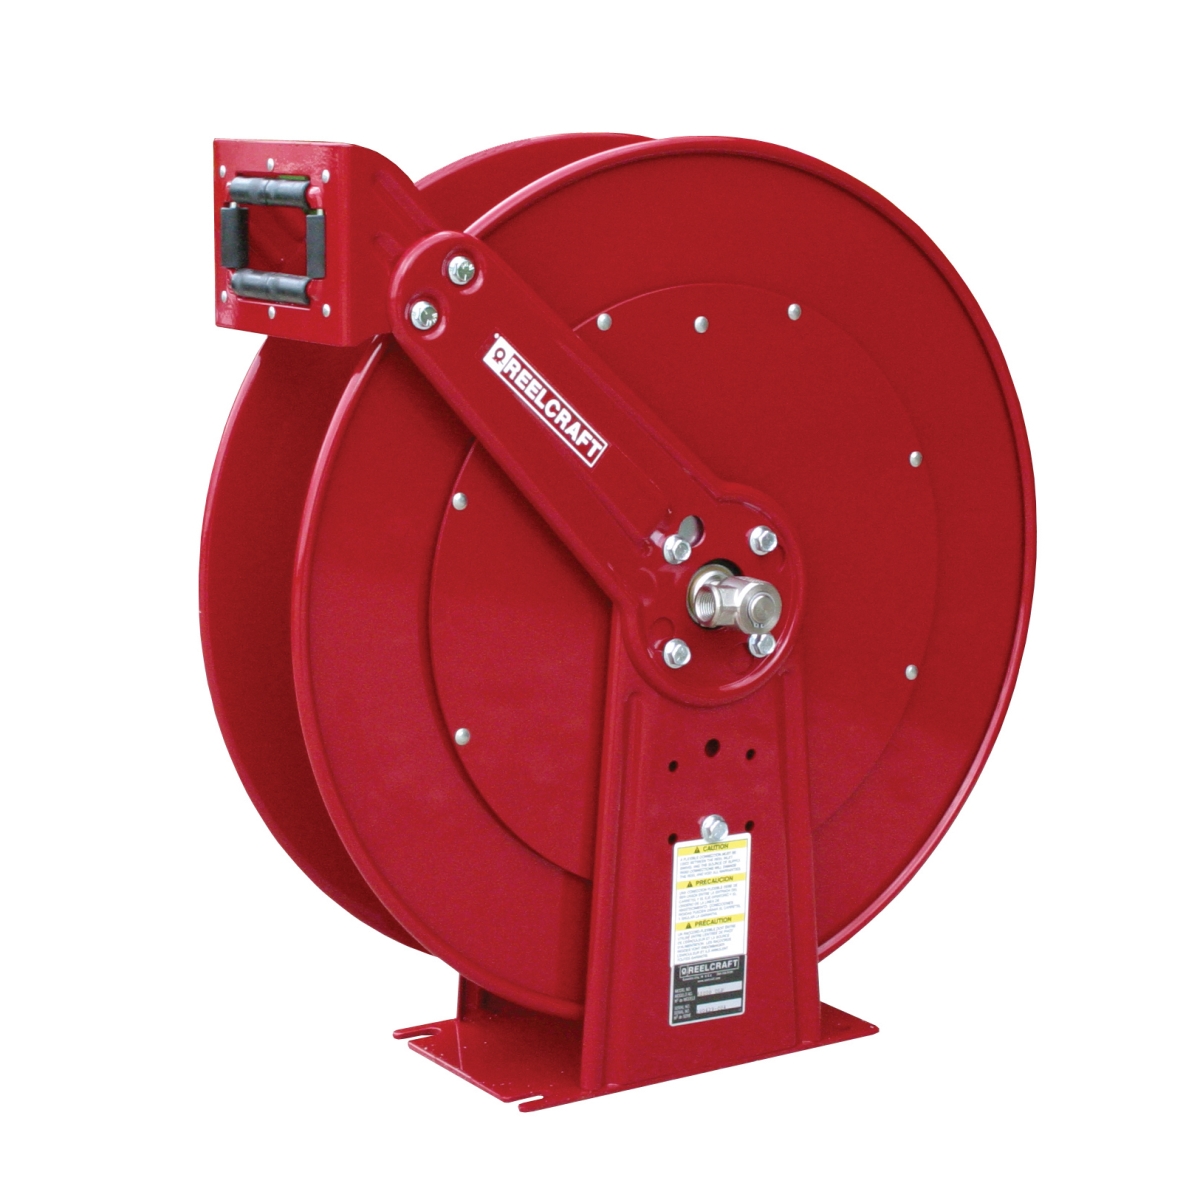 83000 Omp 0.75 In. X 50 Ft. Heavy Duty 1500 Psi Oil Without Hose Reel, Red